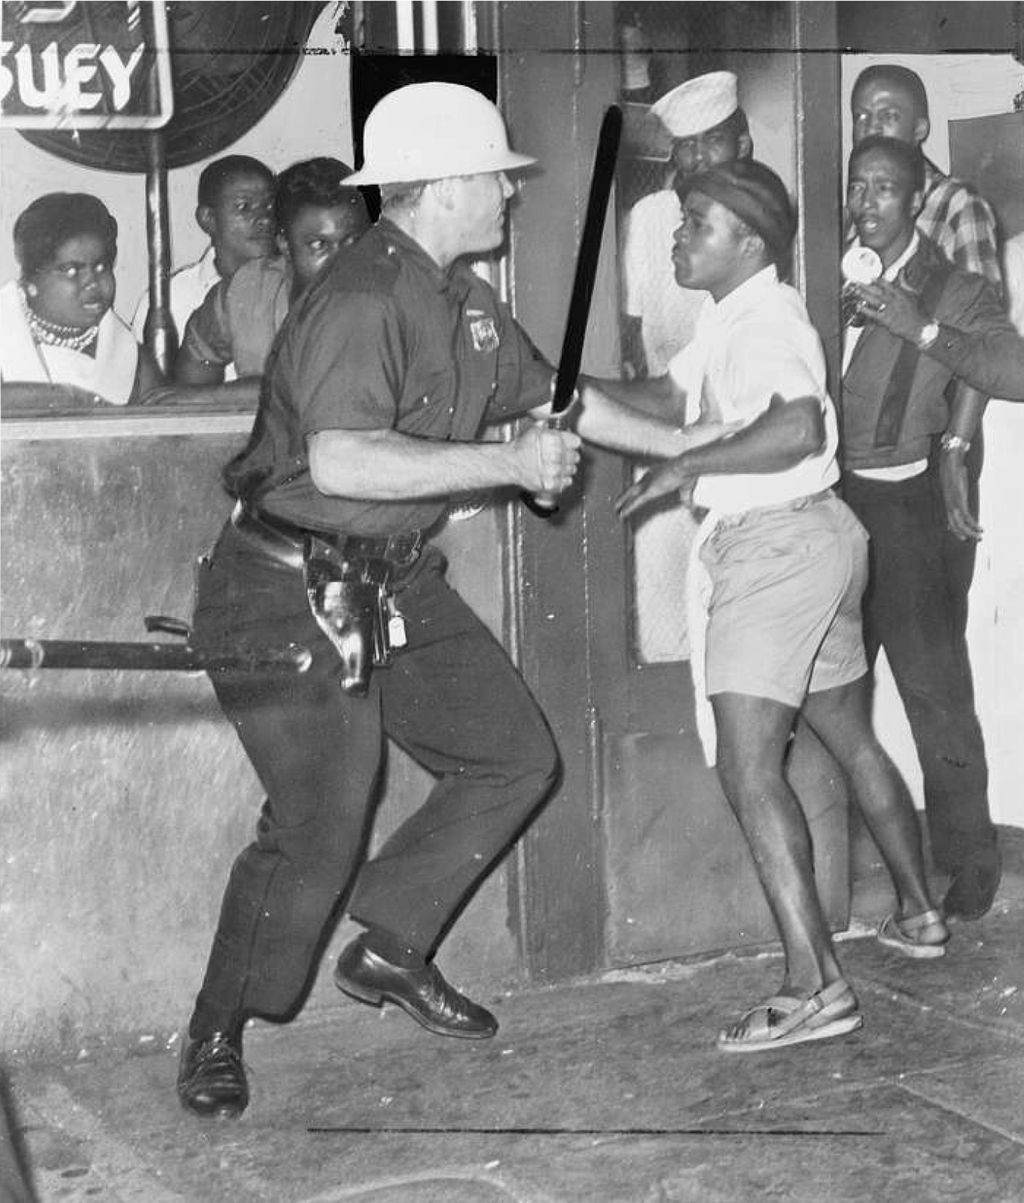 Police officer lifts a police baton at a young black man